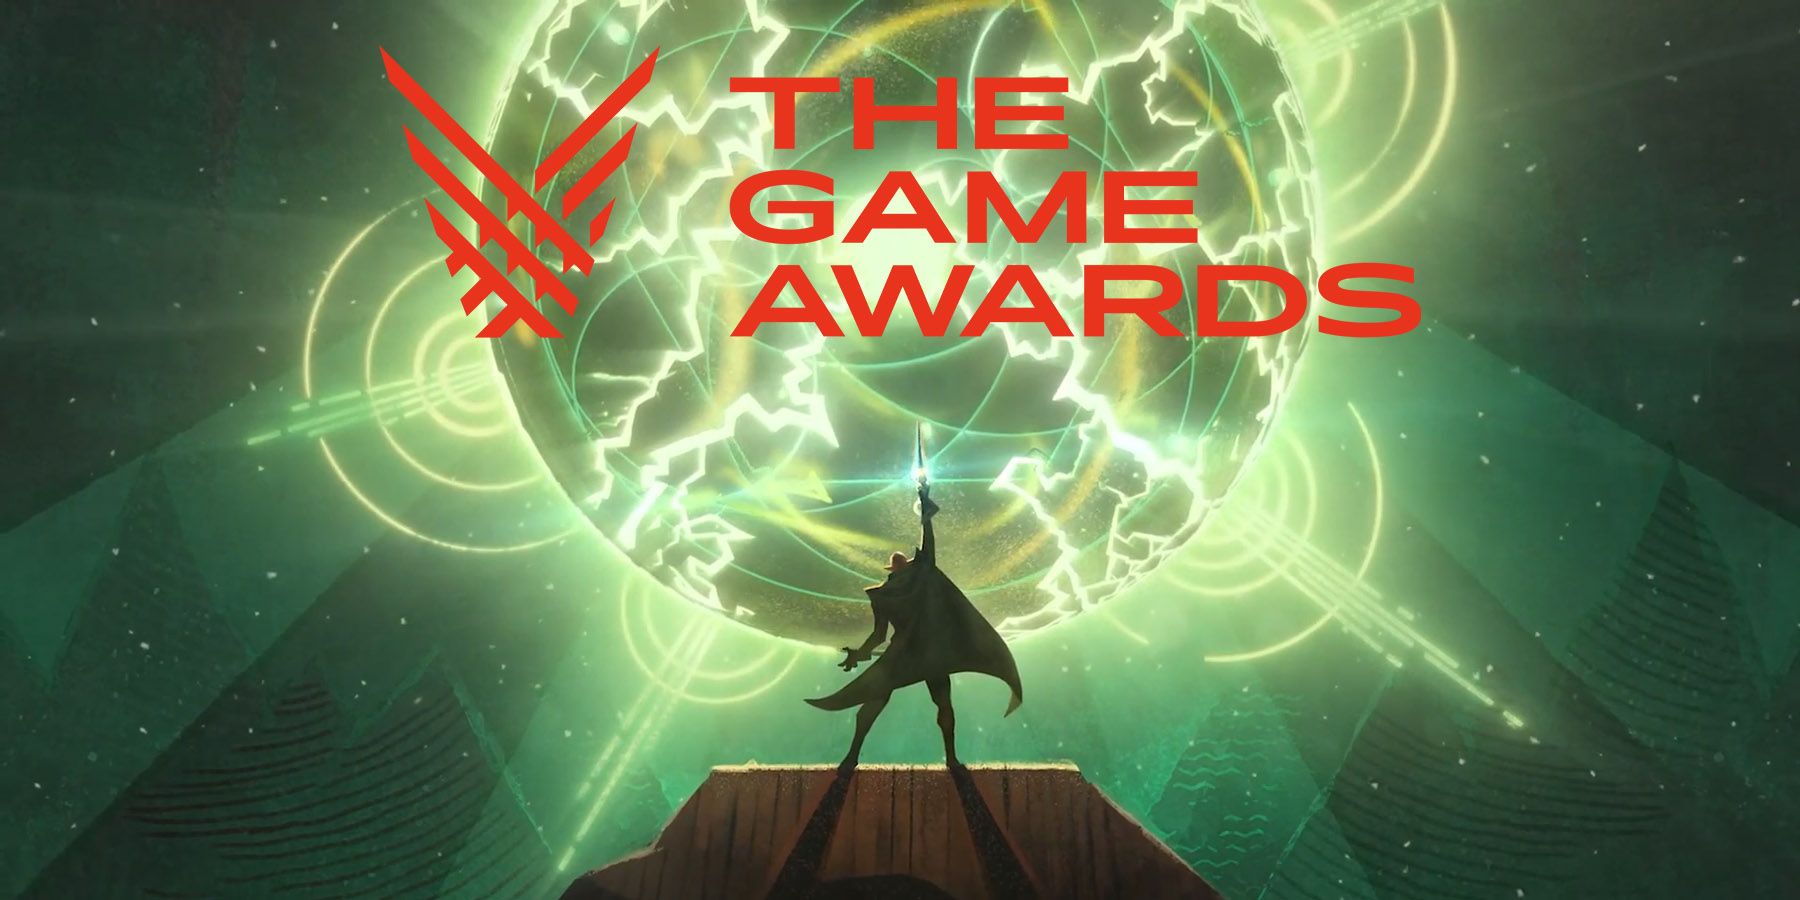 Dragon Age: Inquisition' Wins Game of the Year at The Game Awards